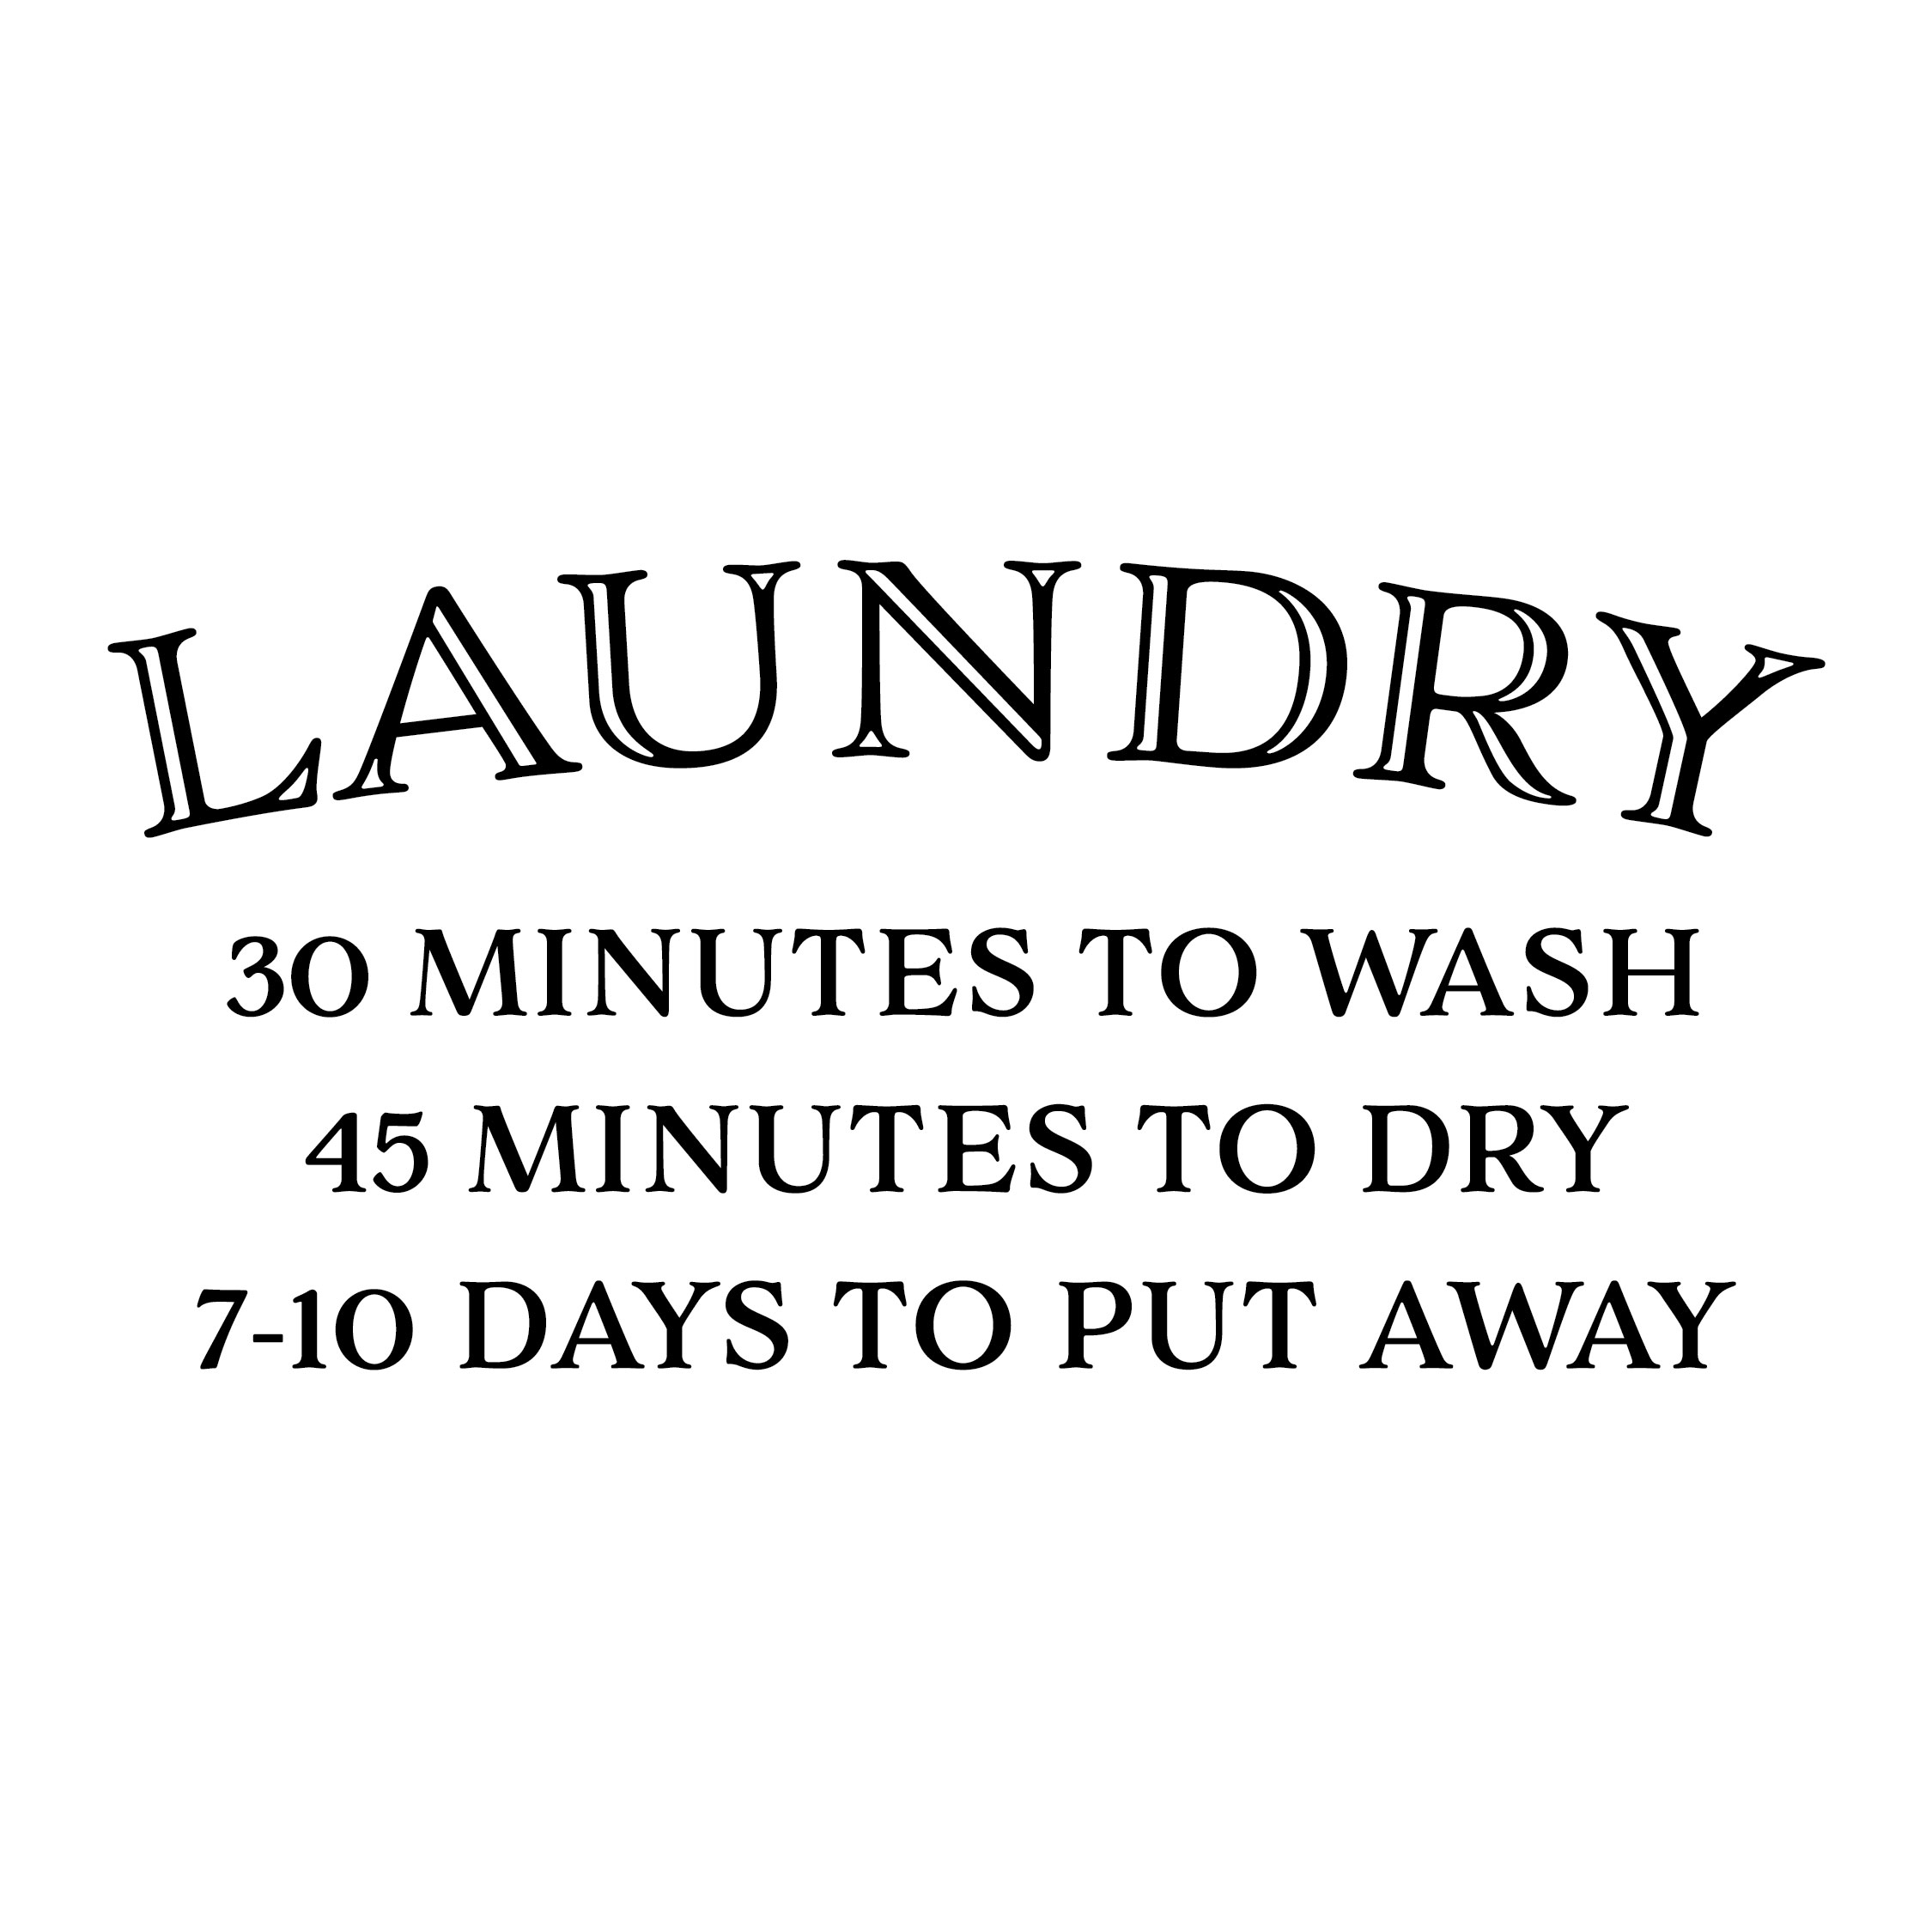 Laundry 30 Minutes to Wash Vinyl Wall Decal, 45 Minutes to Dry